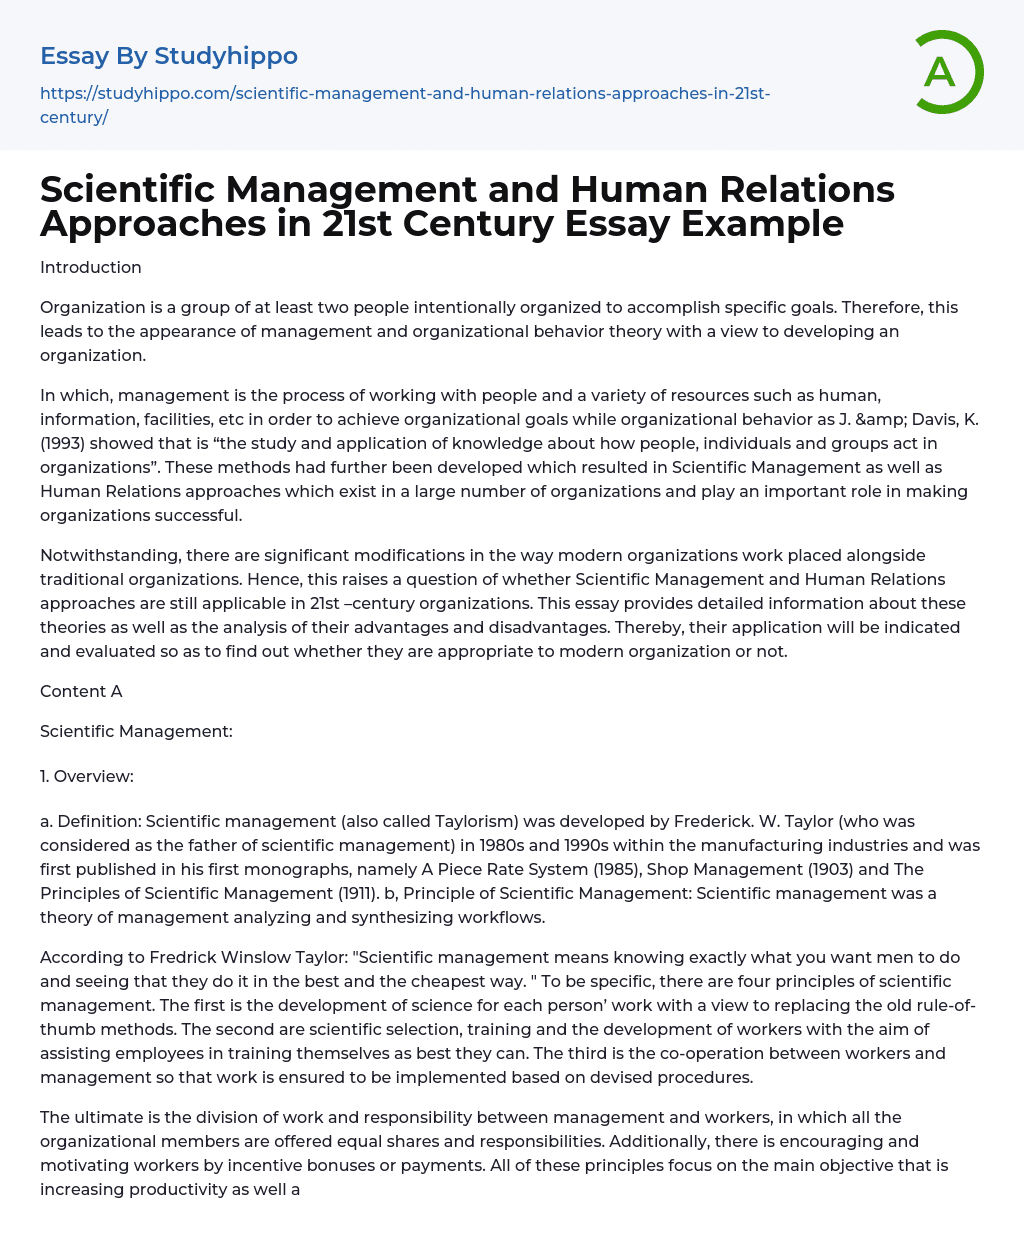 Scientific Management and Human Relations Approaches in 21st Century Essay Example